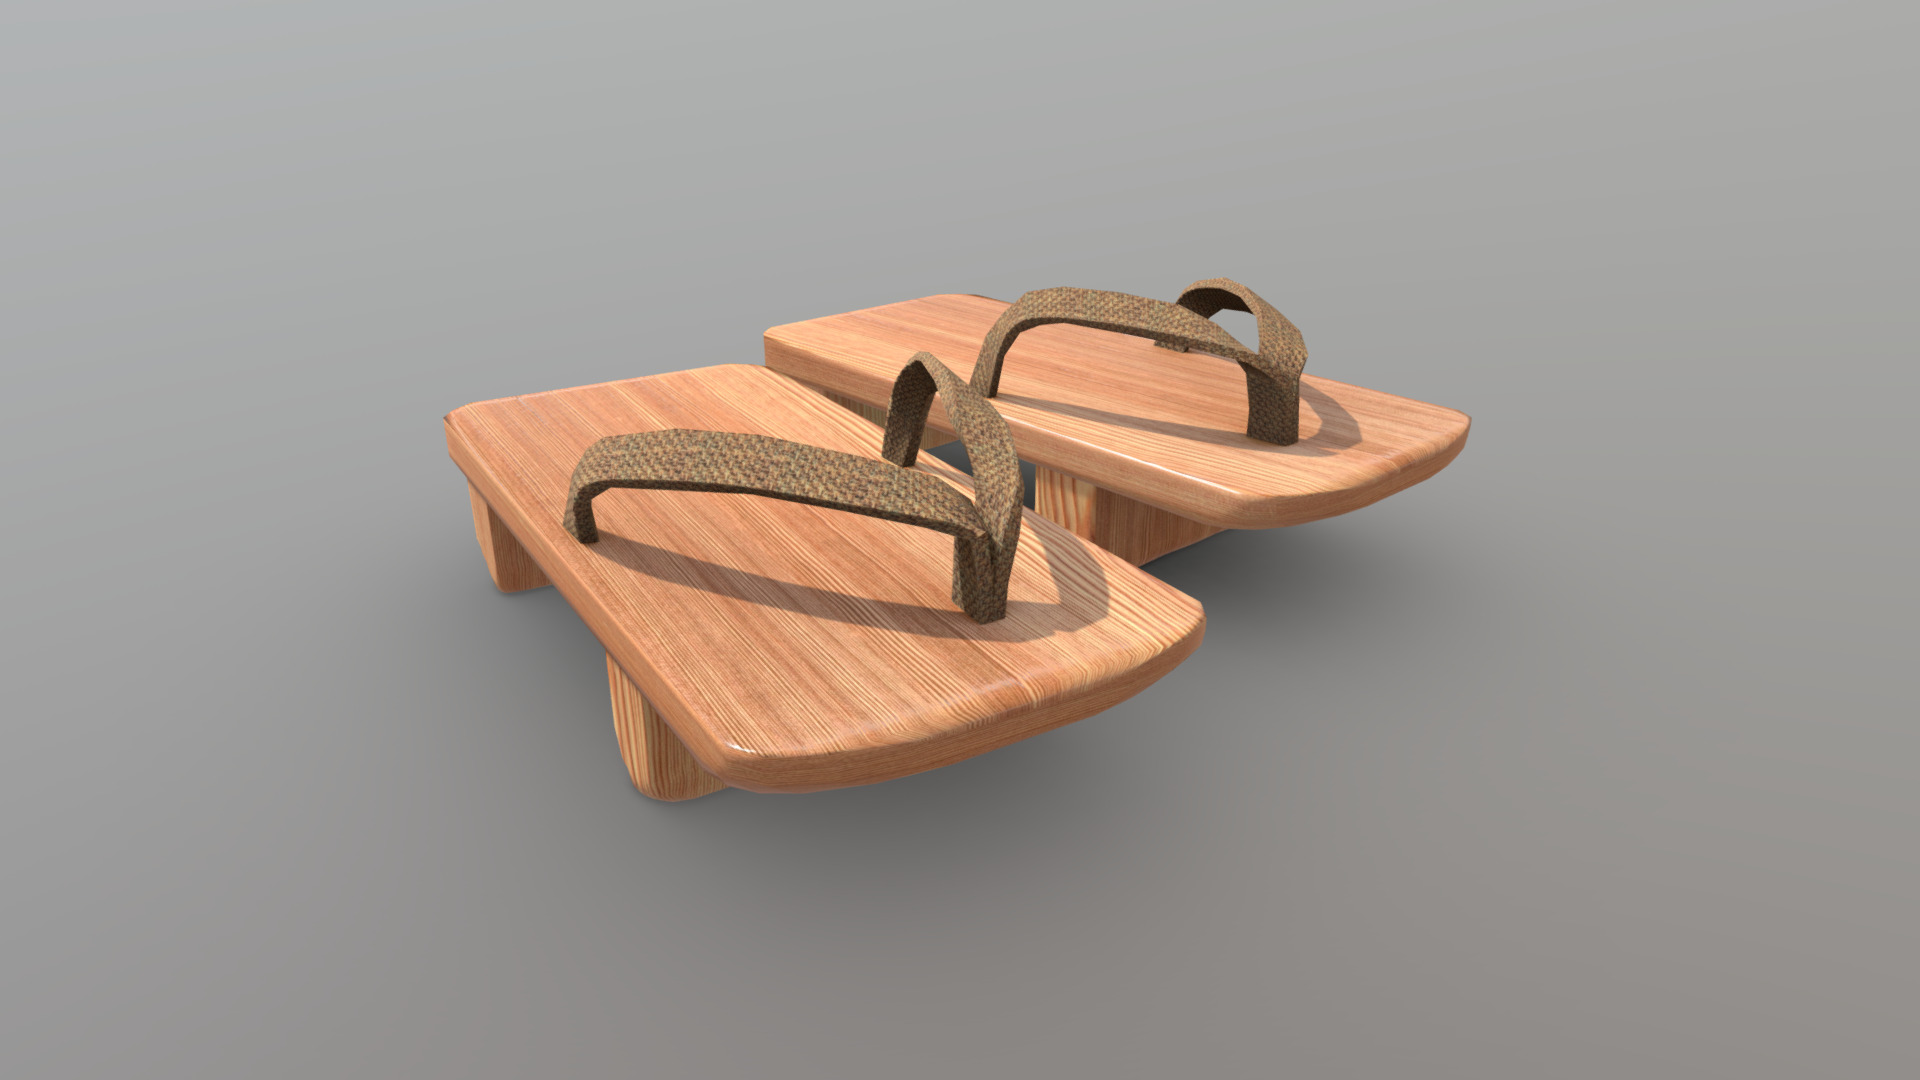 3D model Geta - This is a 3D model of the Geta. The 3D model is about a pair of sandals.